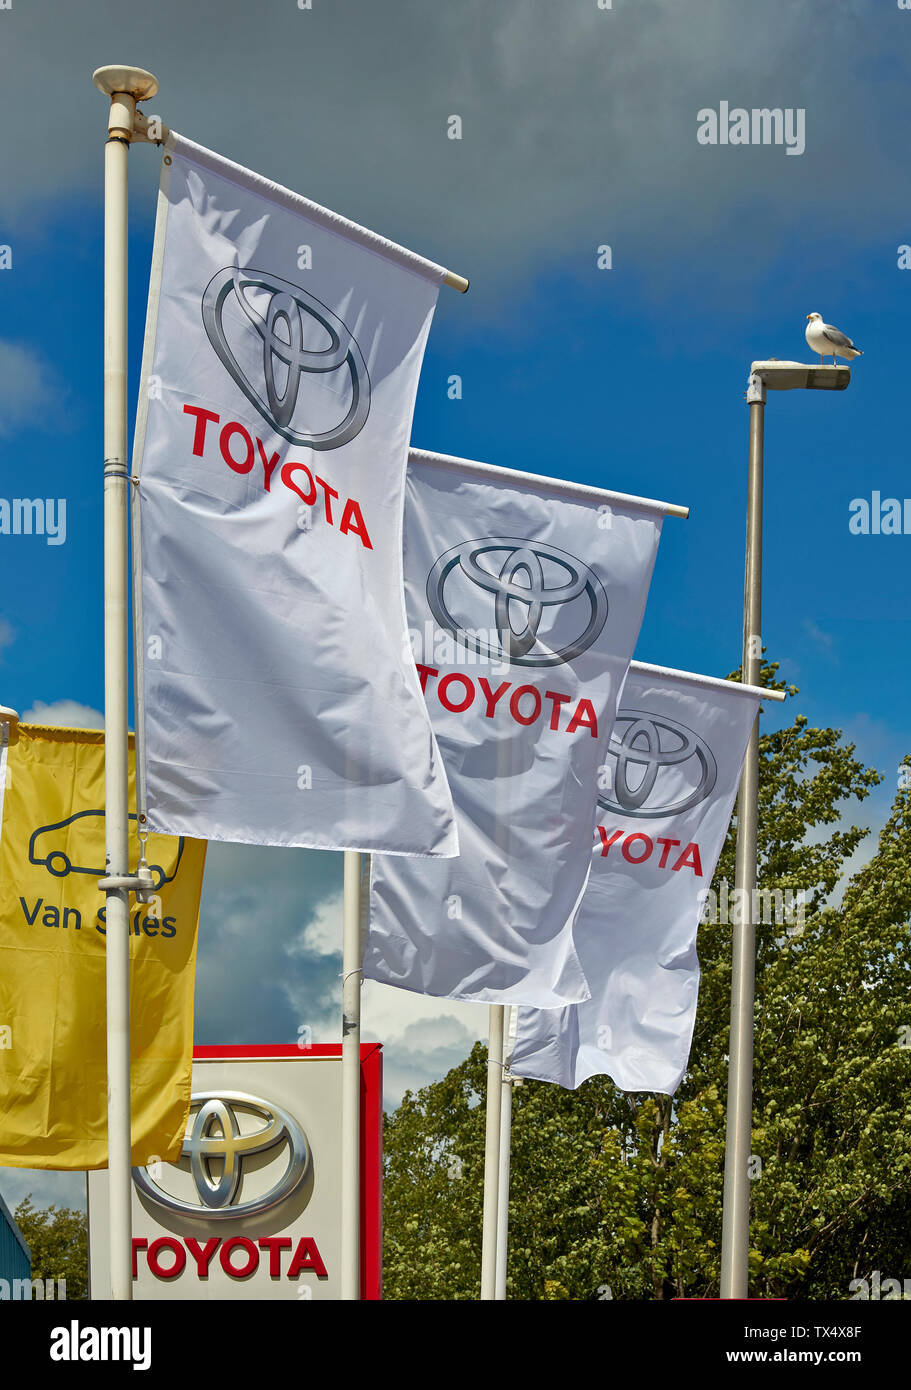 TOYOTA GARAGE SIGN AND FLAGS WITH TOYOTA LOGO OUTSIDE THE MAIN BUILDING Stock Photo